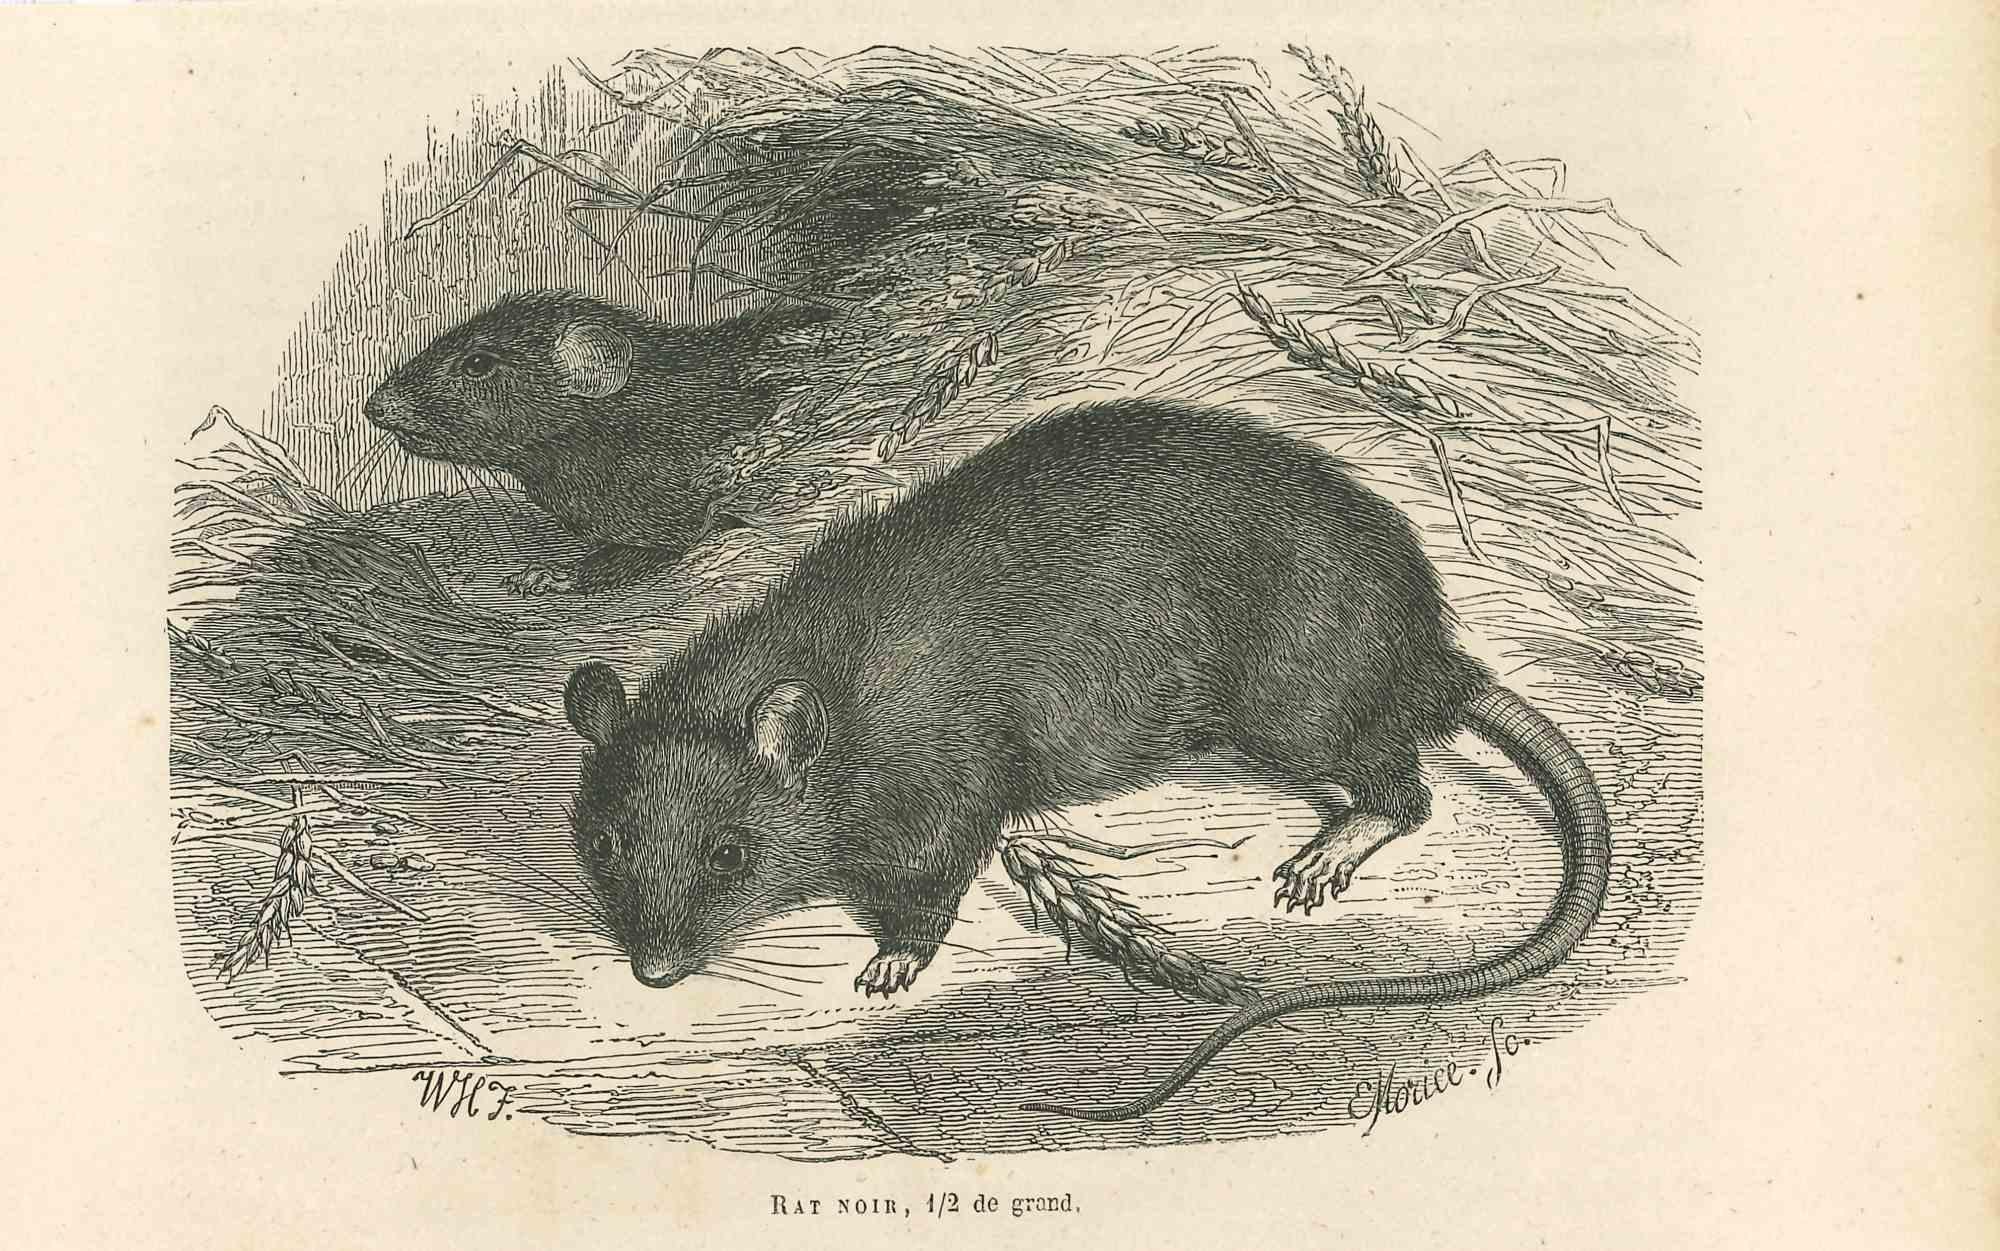 Black Rat is an original lithograph on ivory-colored paper, realized by Paul Gervais (1816-1879). The artwork is from The Series of "Les Trois Règnes de la Nature", and was published in 1854.

Good conditions.

Titled on the lower. With the notes on